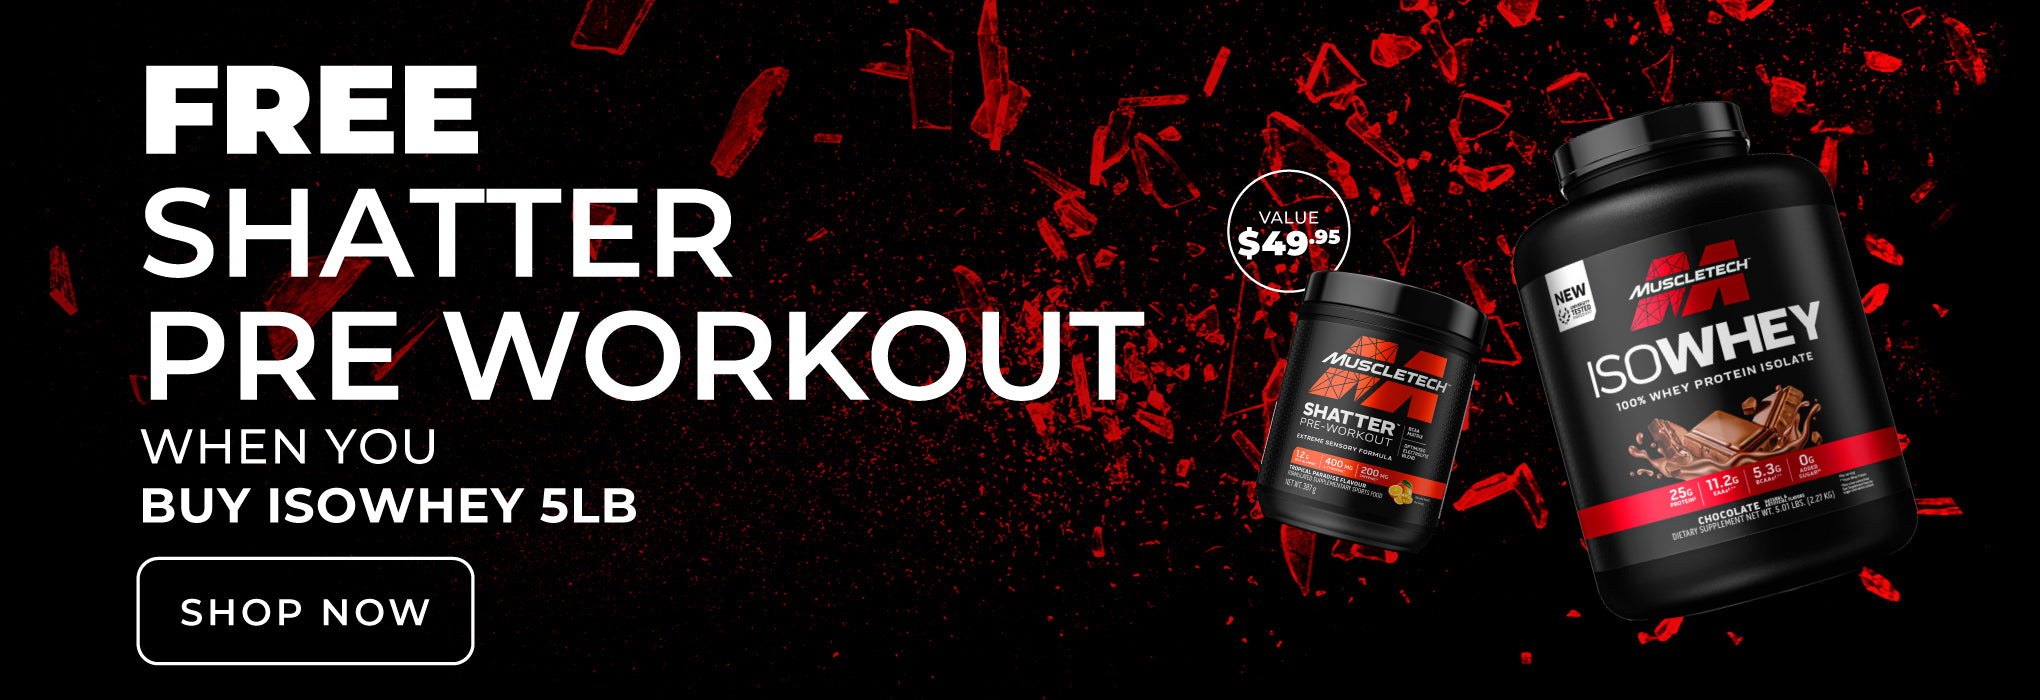 Muscletech - FREE Shatter pre workout when you buy isowhey 5lb